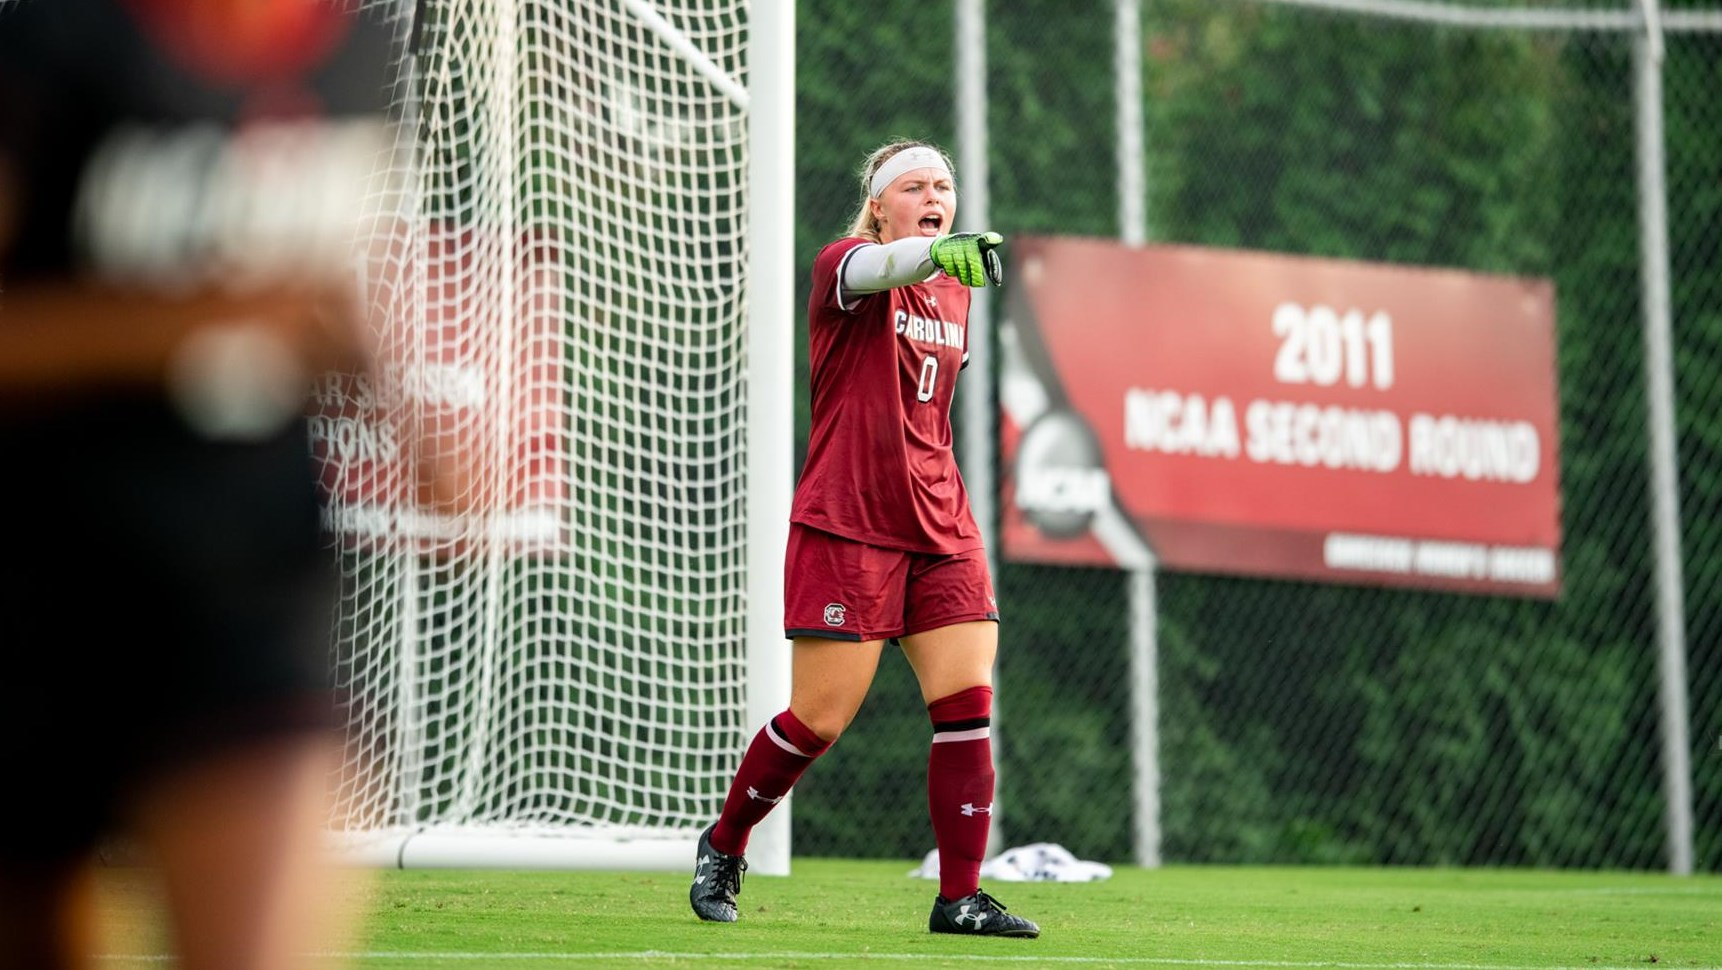 Gamecocks End in a Draw with Vanderbilt